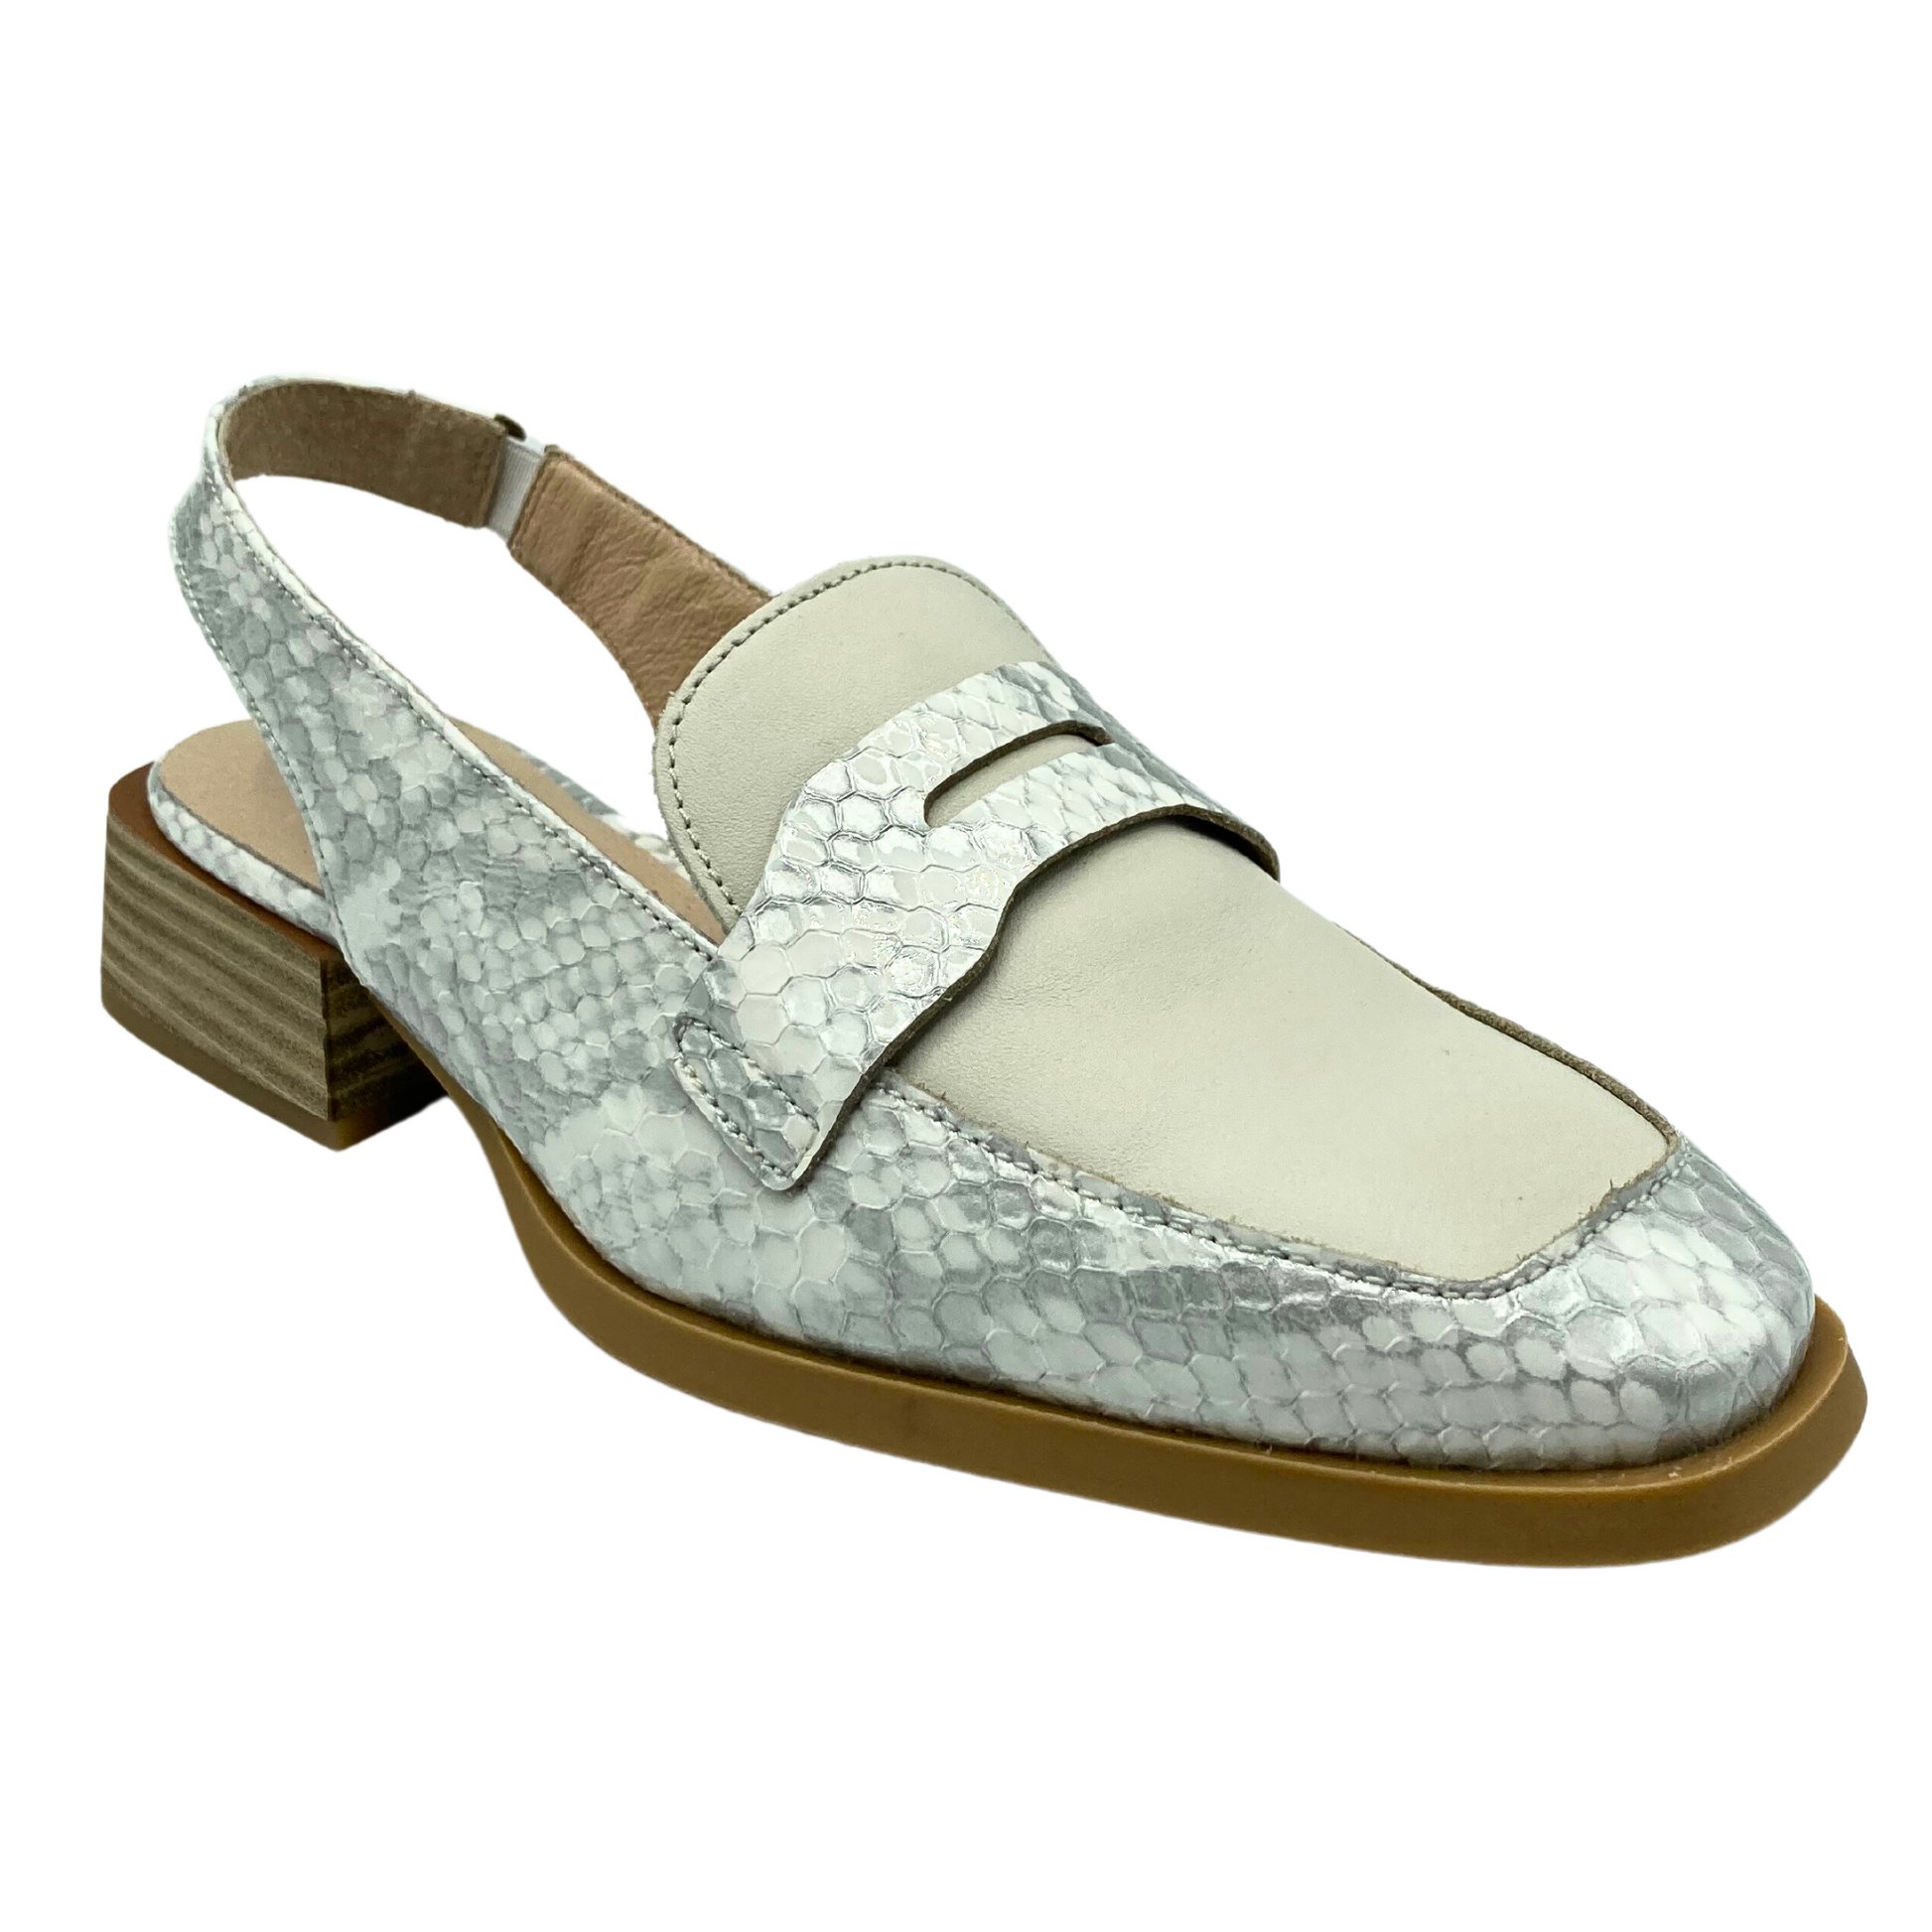 Angled front view of a slingback loafer.  Shown in a faux snake/taupe combination